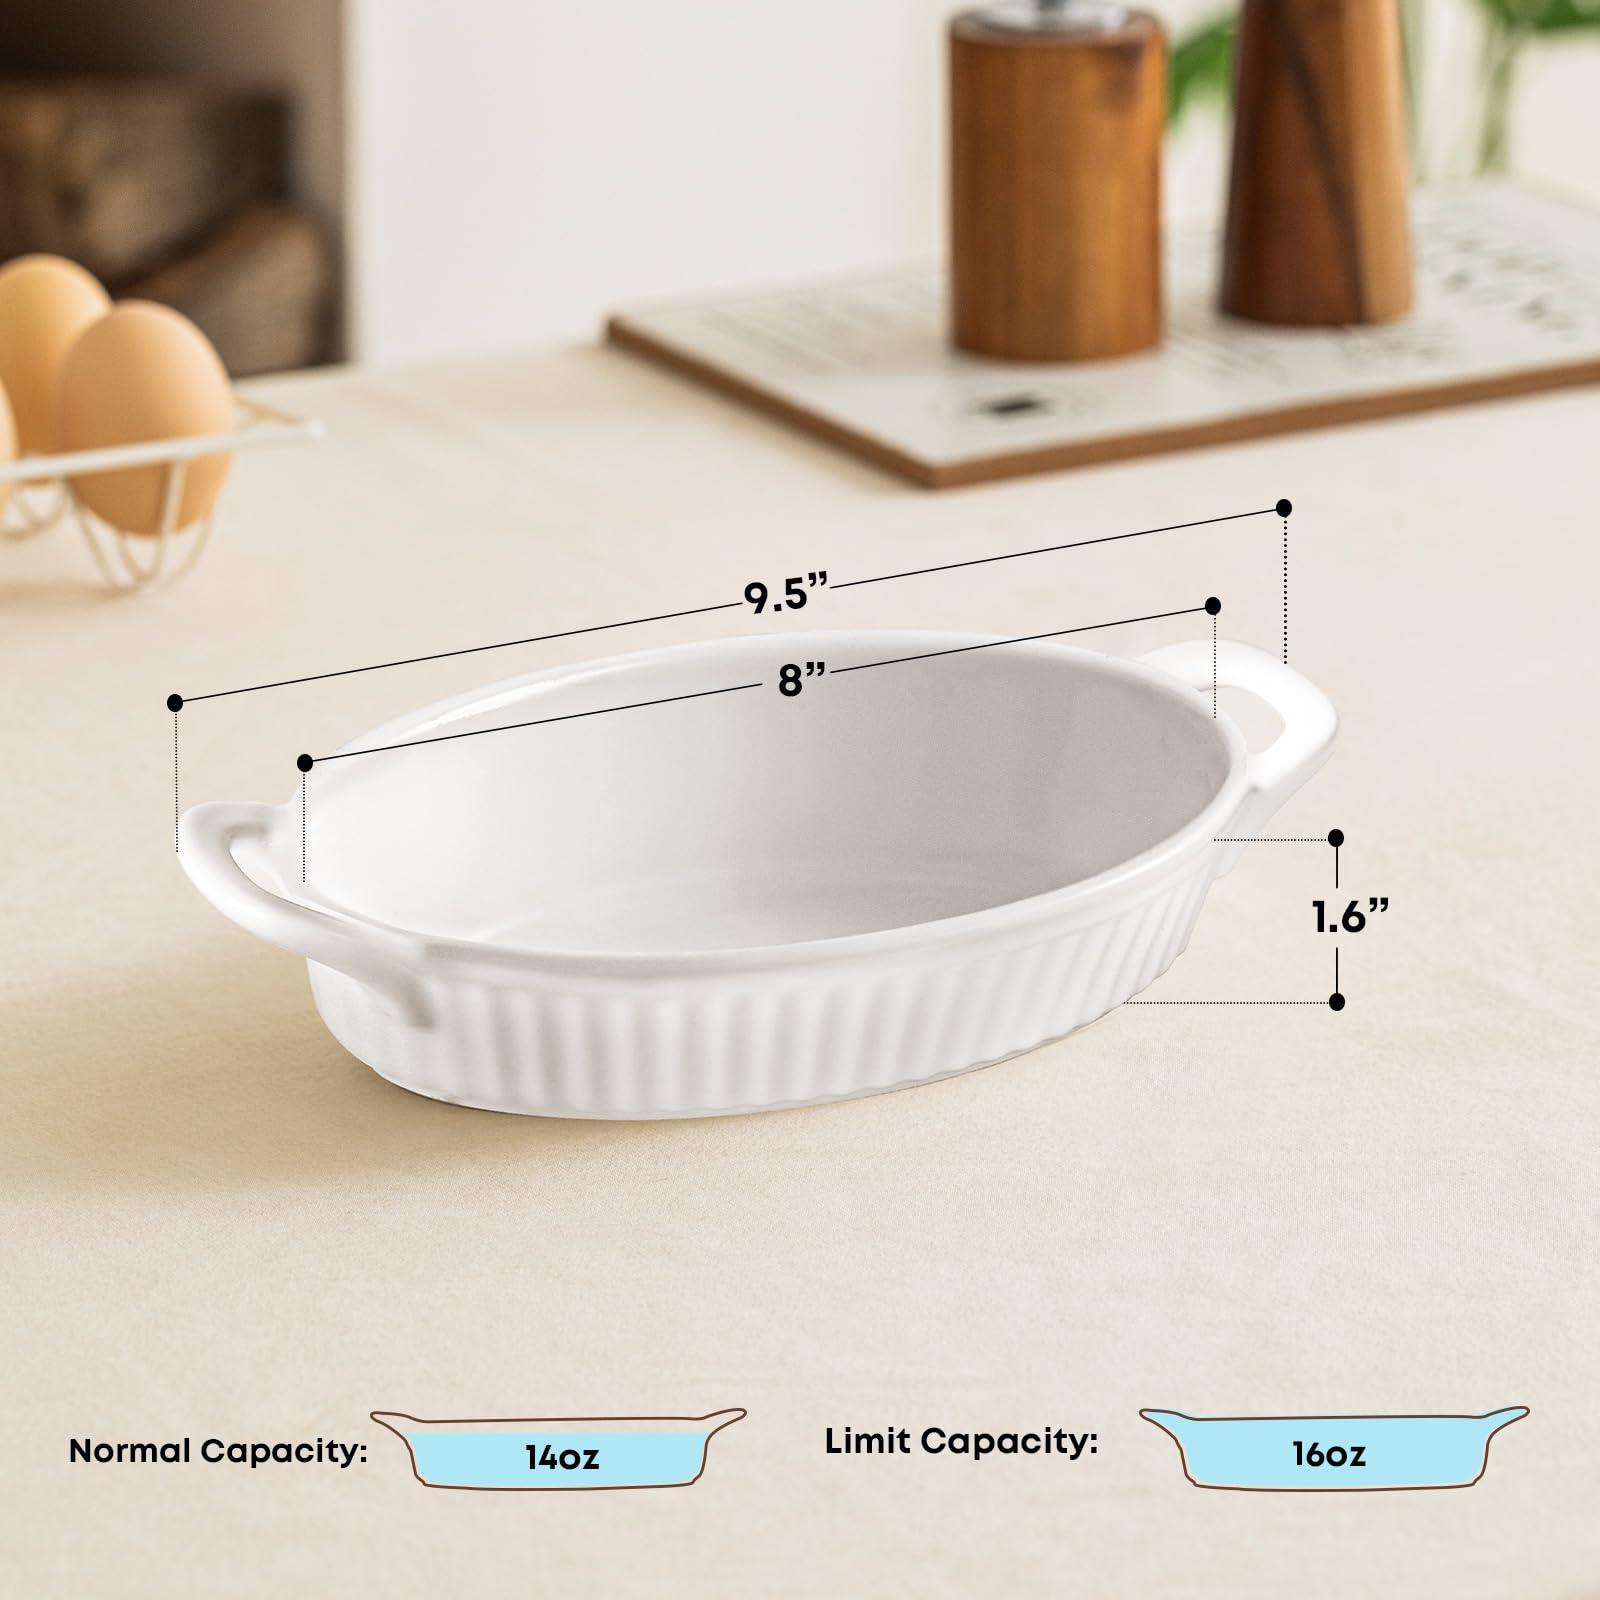 Frewinky Baking Dishes,9-inch Ceramic Baking Dish Set with Handles Heat Resistant,Mini Casserole-Dishes for Oven, Porcelain Oval Baking Dishes for Gratin,Casserole and Roasting,Set of 4,White - CookCave